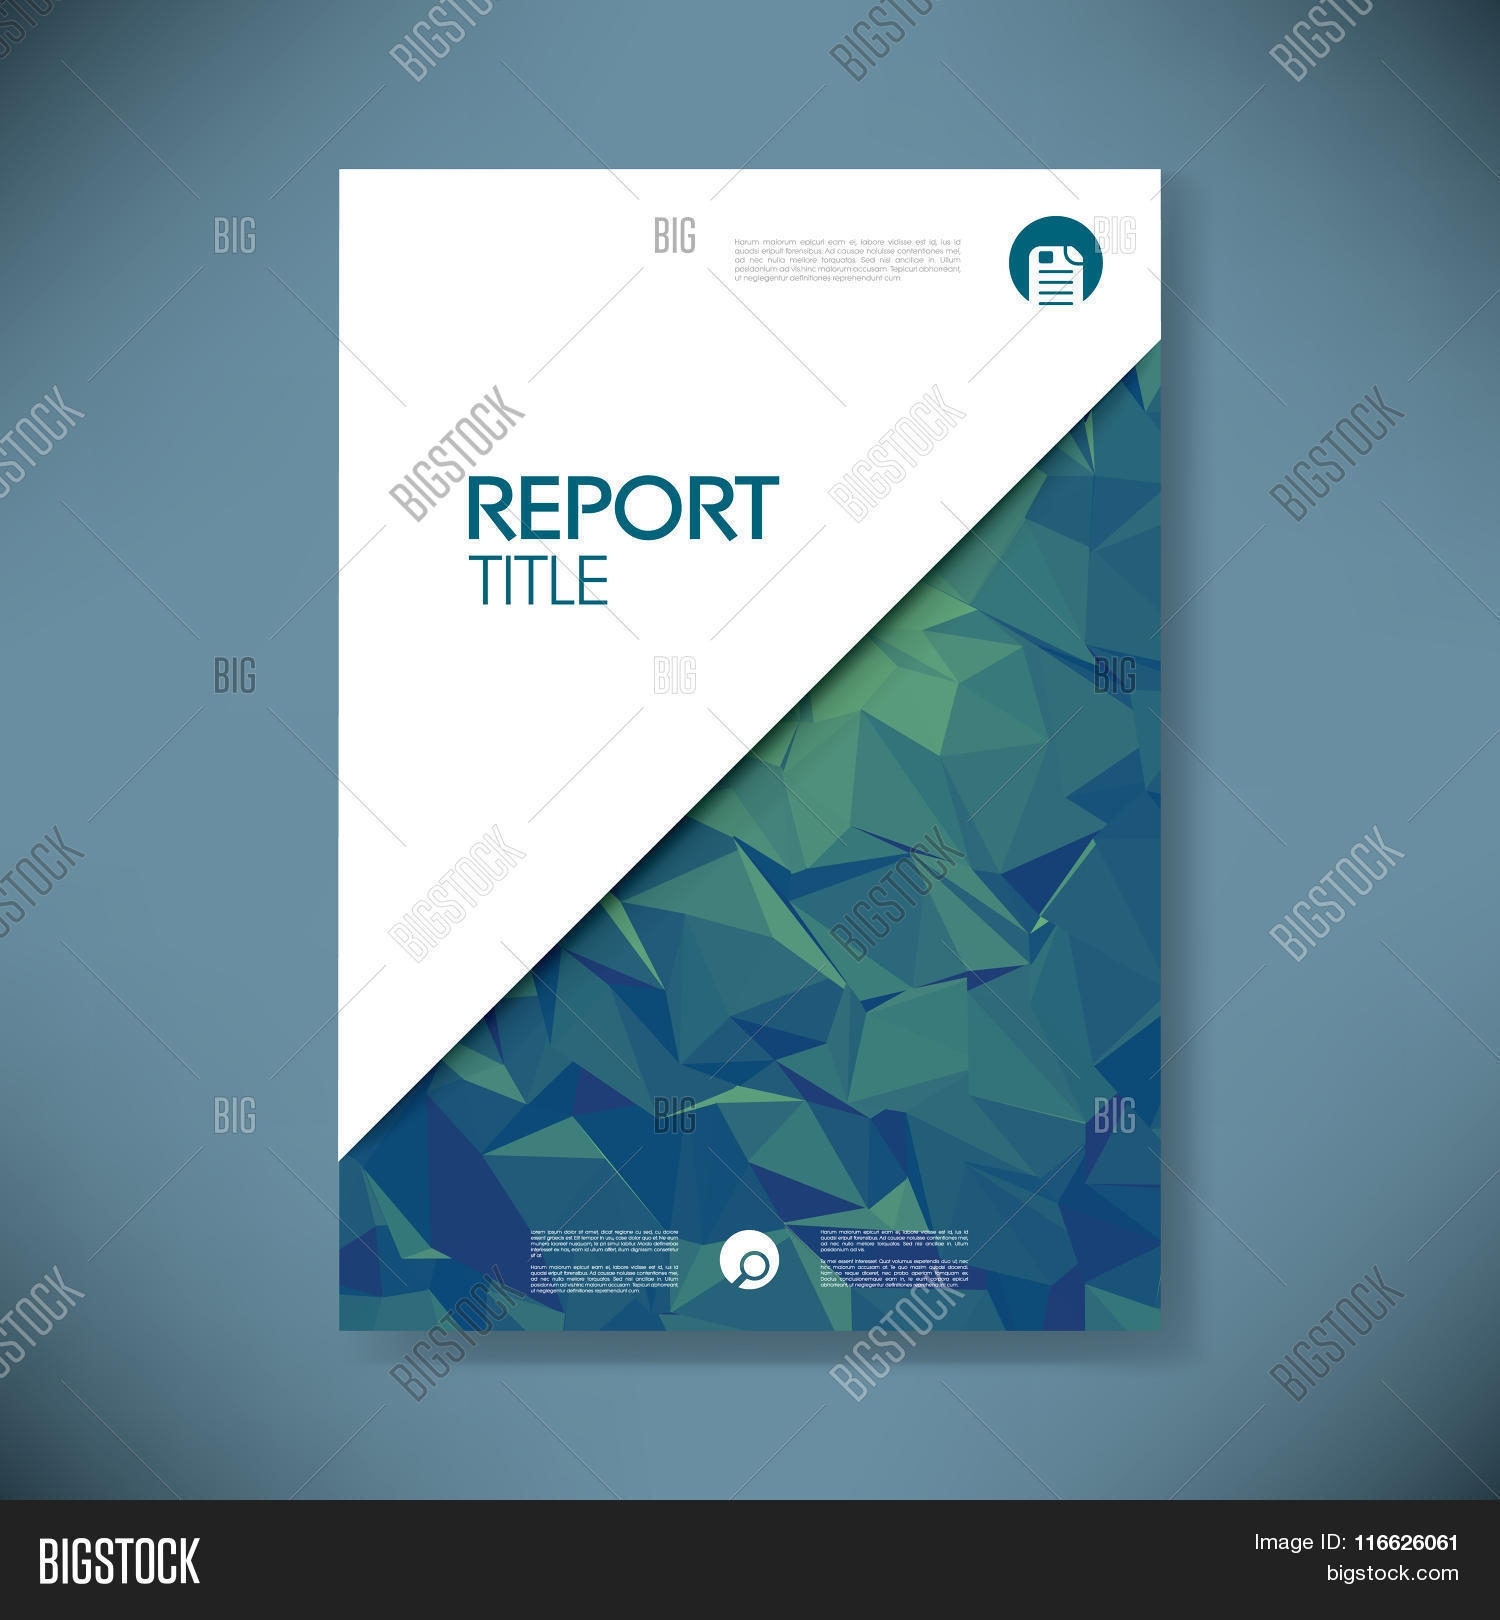 Business Report Cover Template On Vector & Photo | Bigstock In Cover Page For Report Template